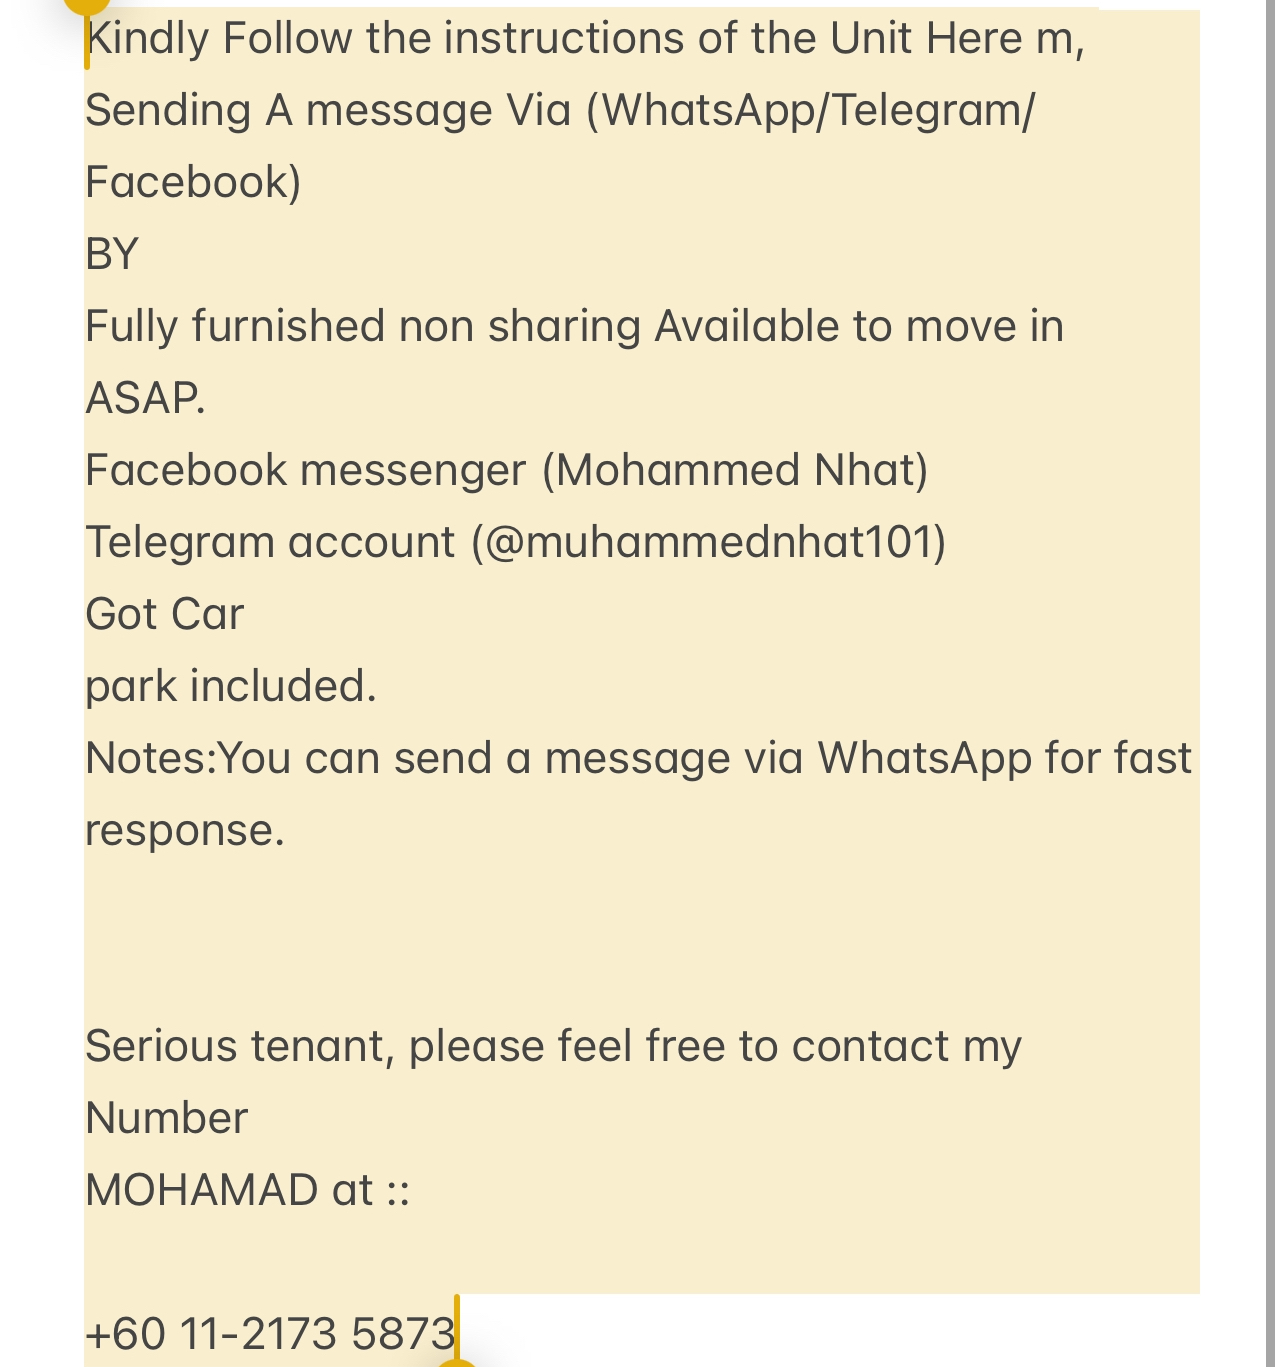 room for rent, master room, fraser business park, Send the owner a message on WhatsApp/facebook if you want to RENT the unit facebook (Mohammed Nhat)&Telegram(@muhammednhat101) Fully furnished non sharing :(comfortable)